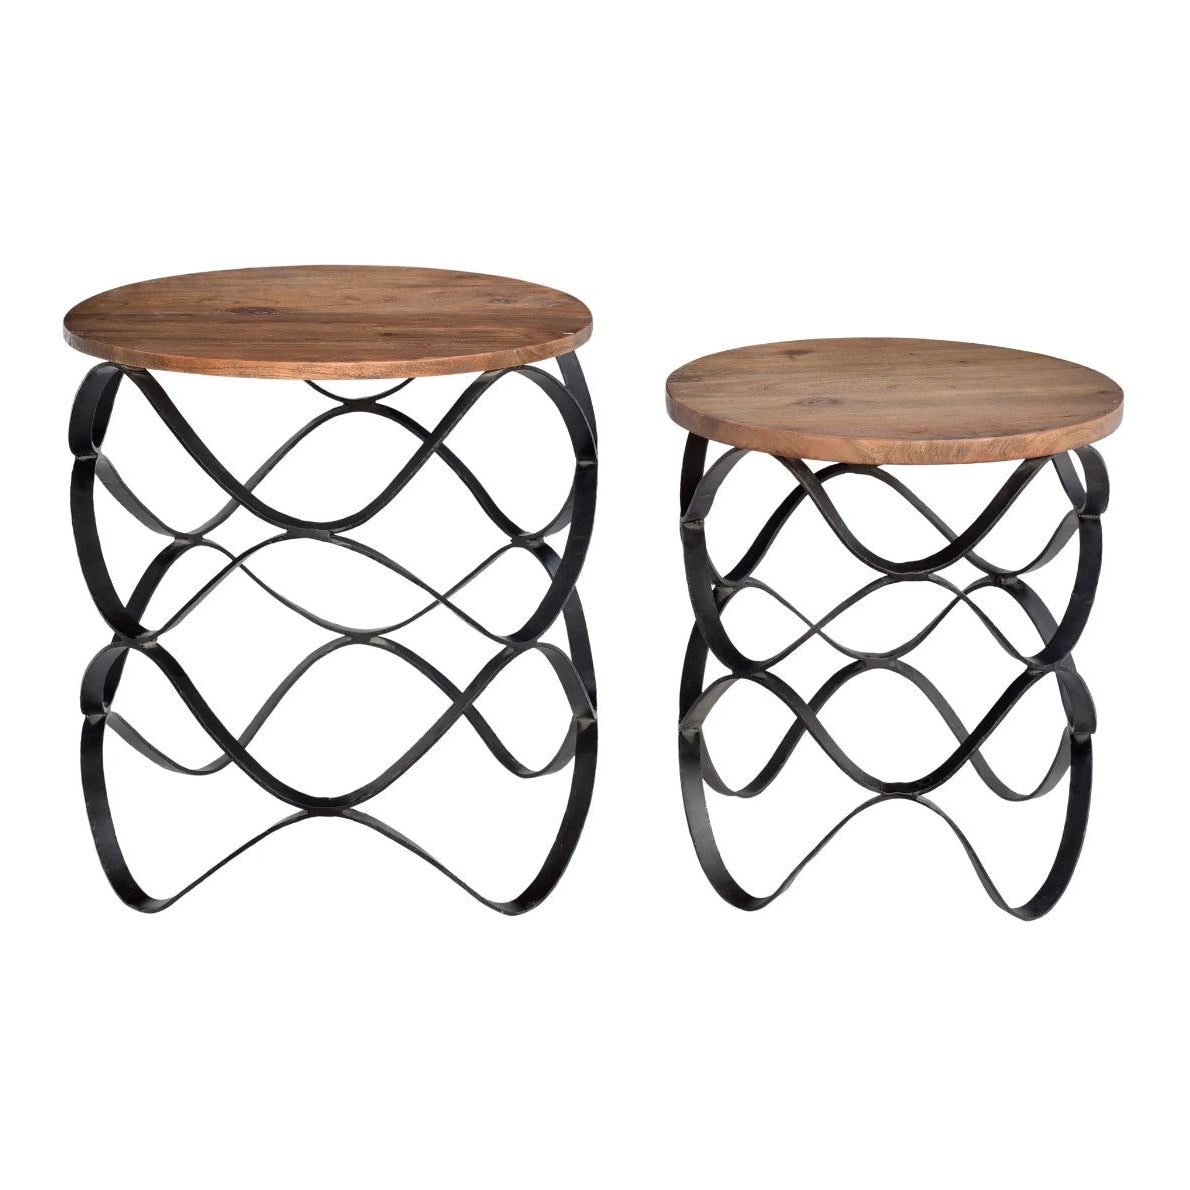 Crestview Collection Bengal Manor 22" x 22" x 24" Rustic Wavy Iron And Wood Set of Tables In Natural Wood and Black Finish